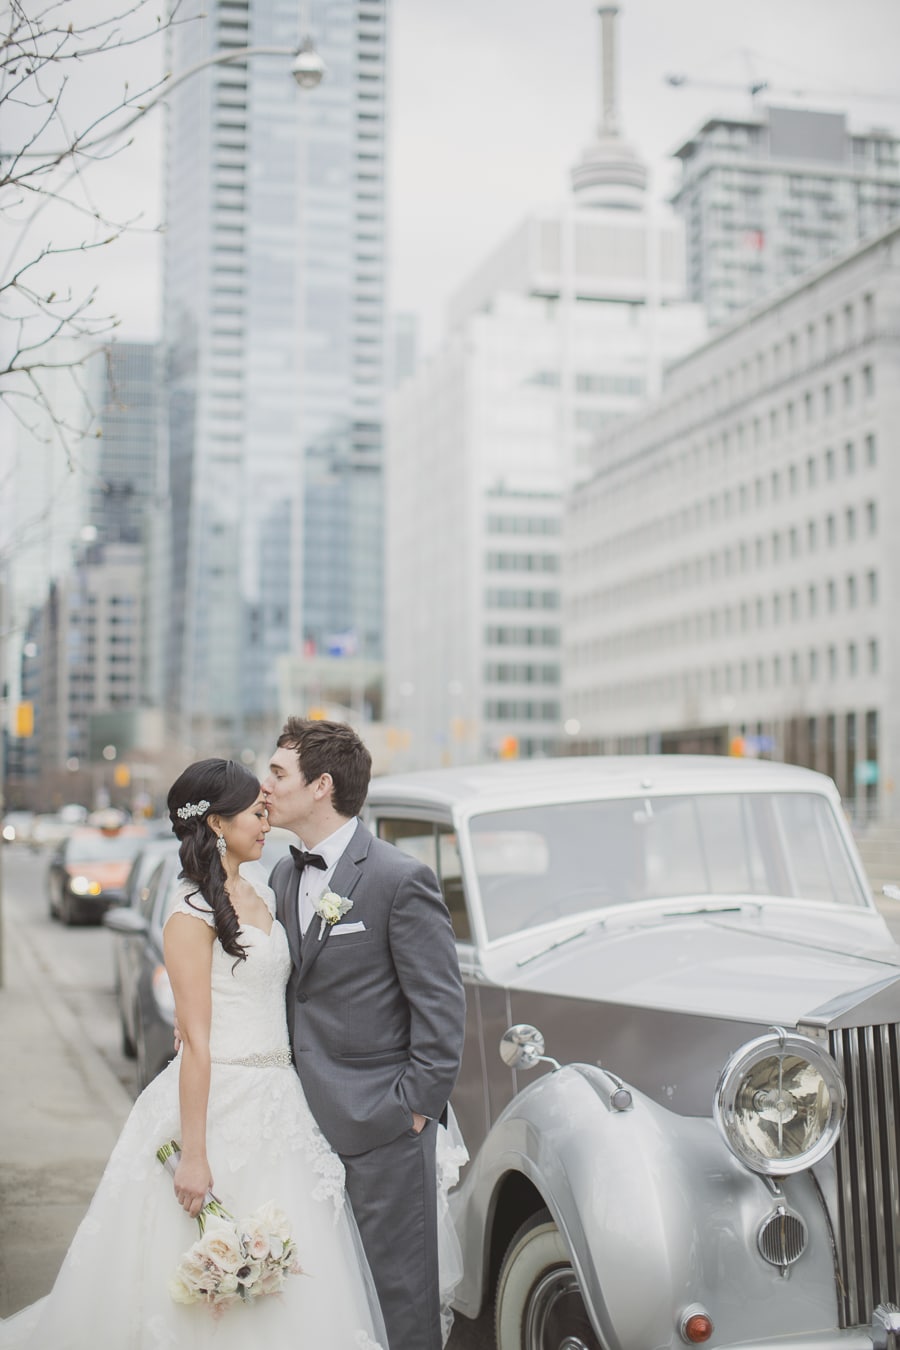 Bride and groom pose outside their Rolls Royce. See more at Rebecca Chan Weddings and Events https://www.rebeccachan.ca